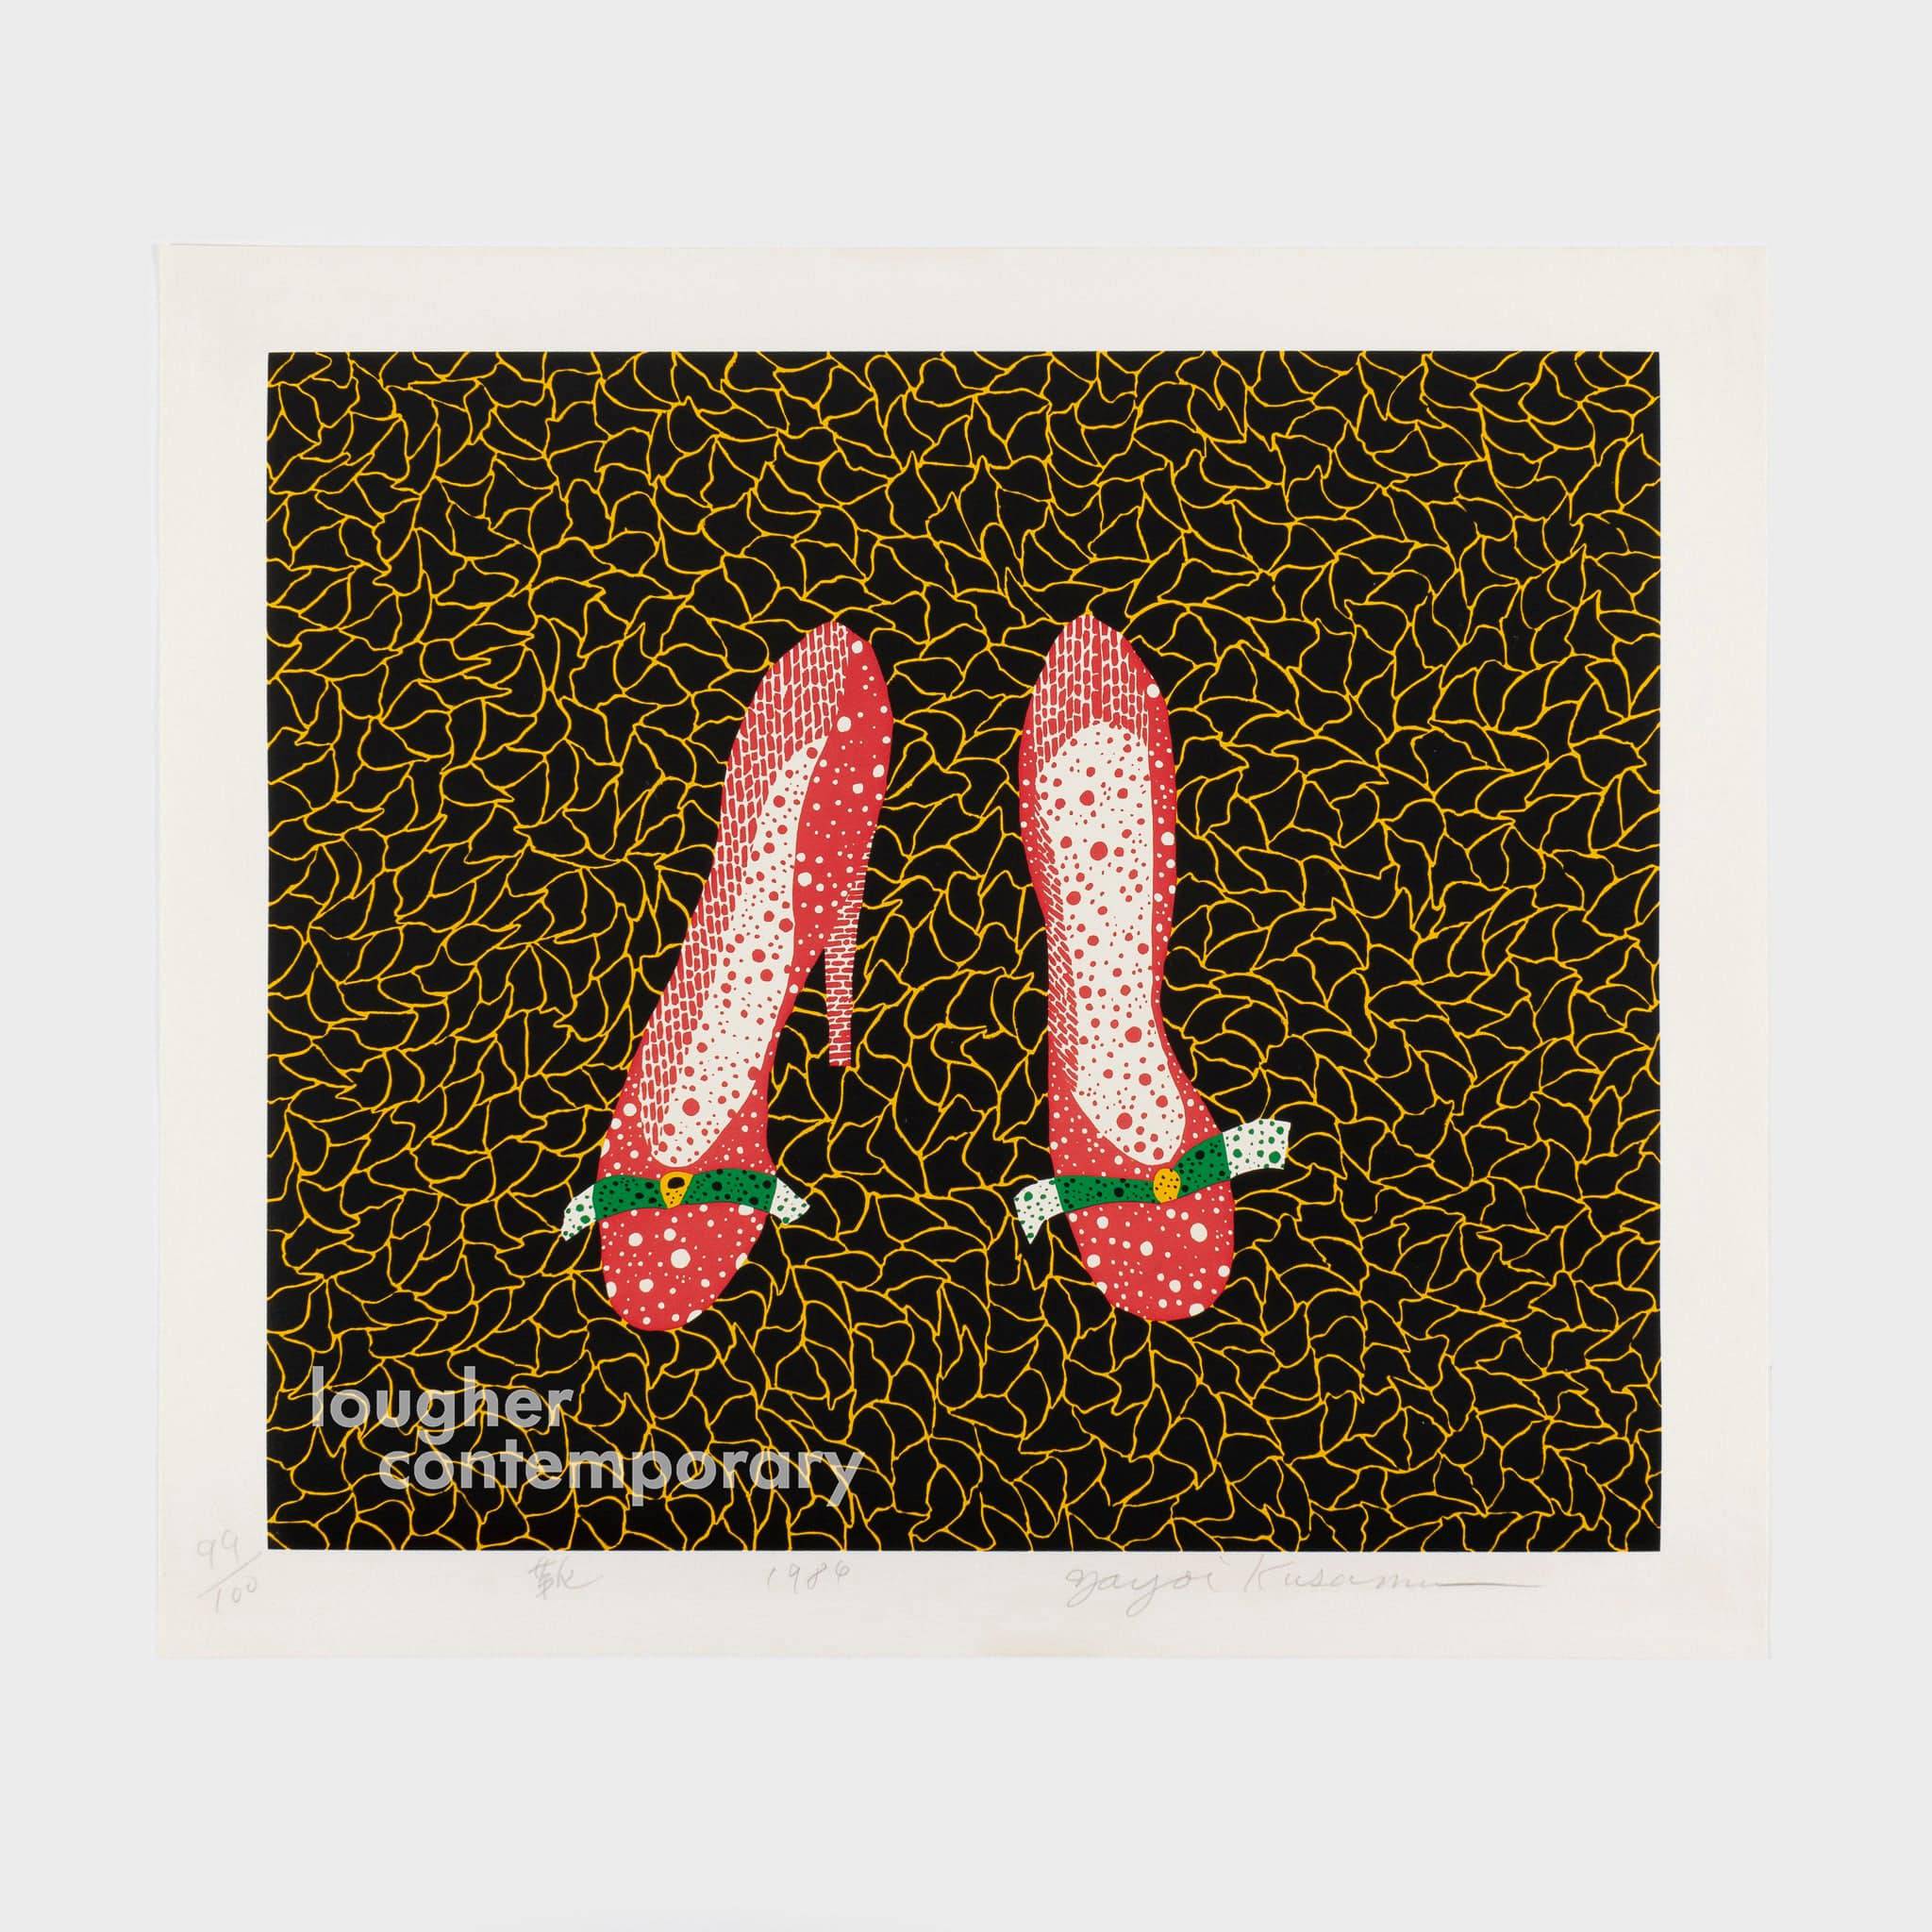 Yayoi Kusama, Shoes, 1984 For Sale - Lougher Contemporary